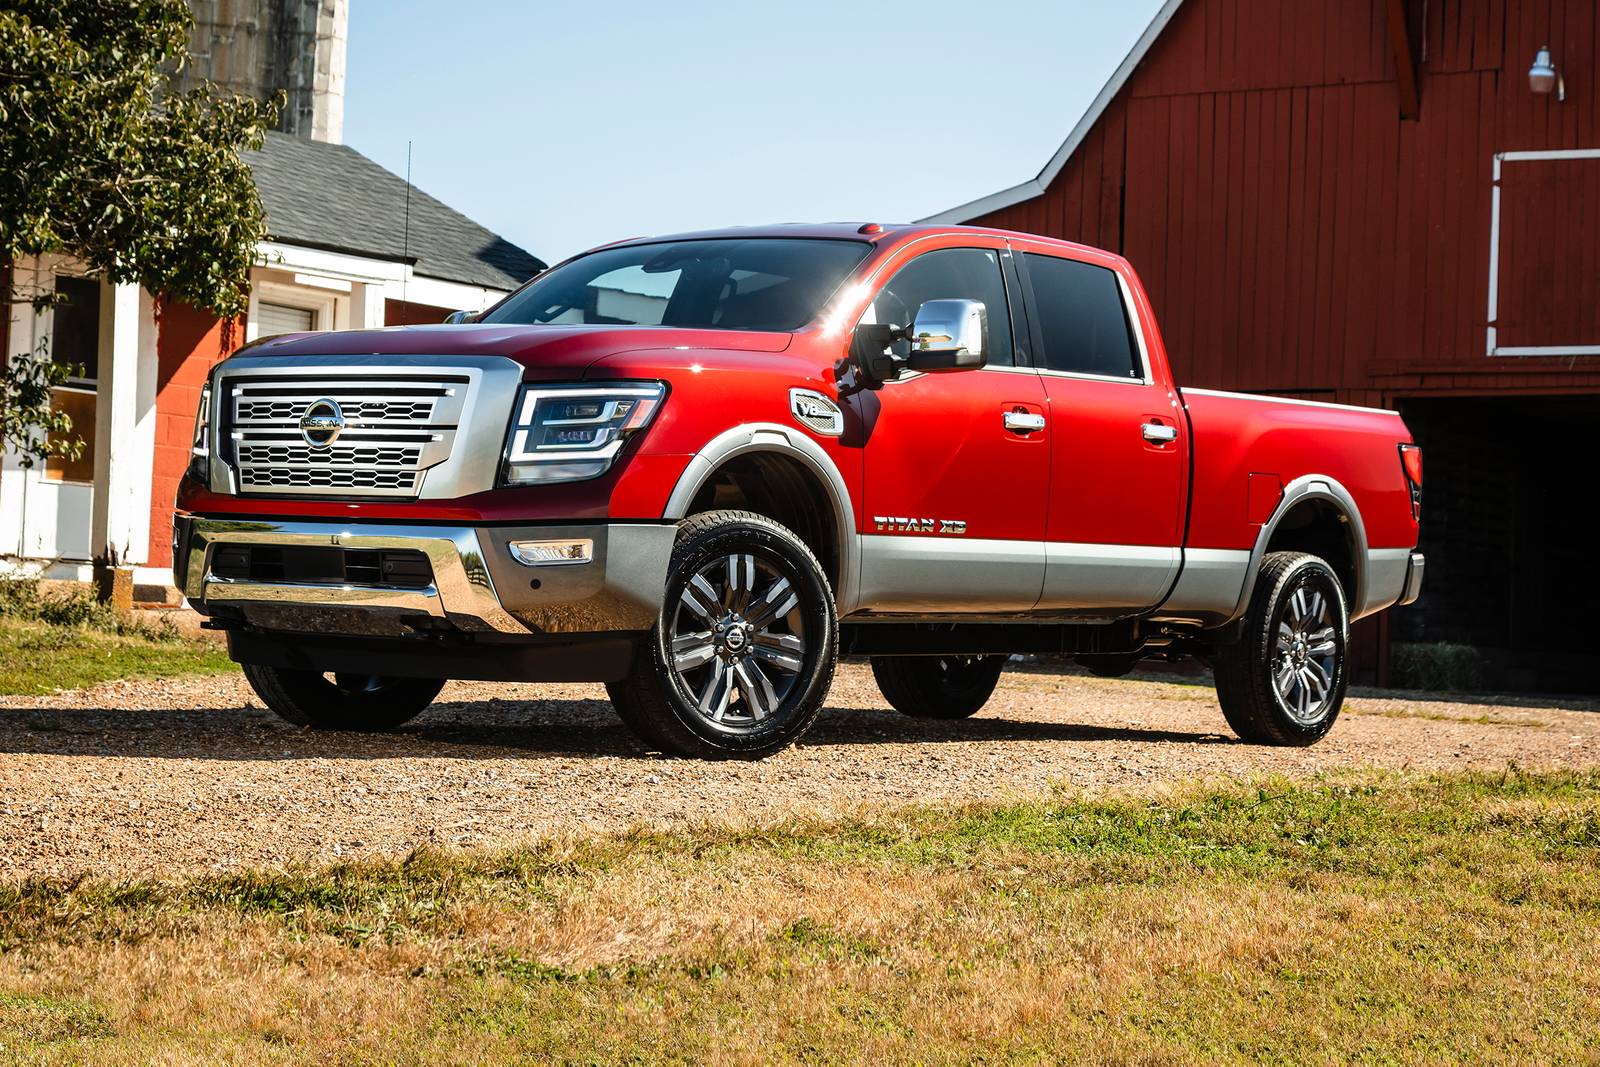 Top 10 trucks for towing 8 - Best Trucks by Towing Capacity – Every Model Ranked &amp; Rated by Our Experts